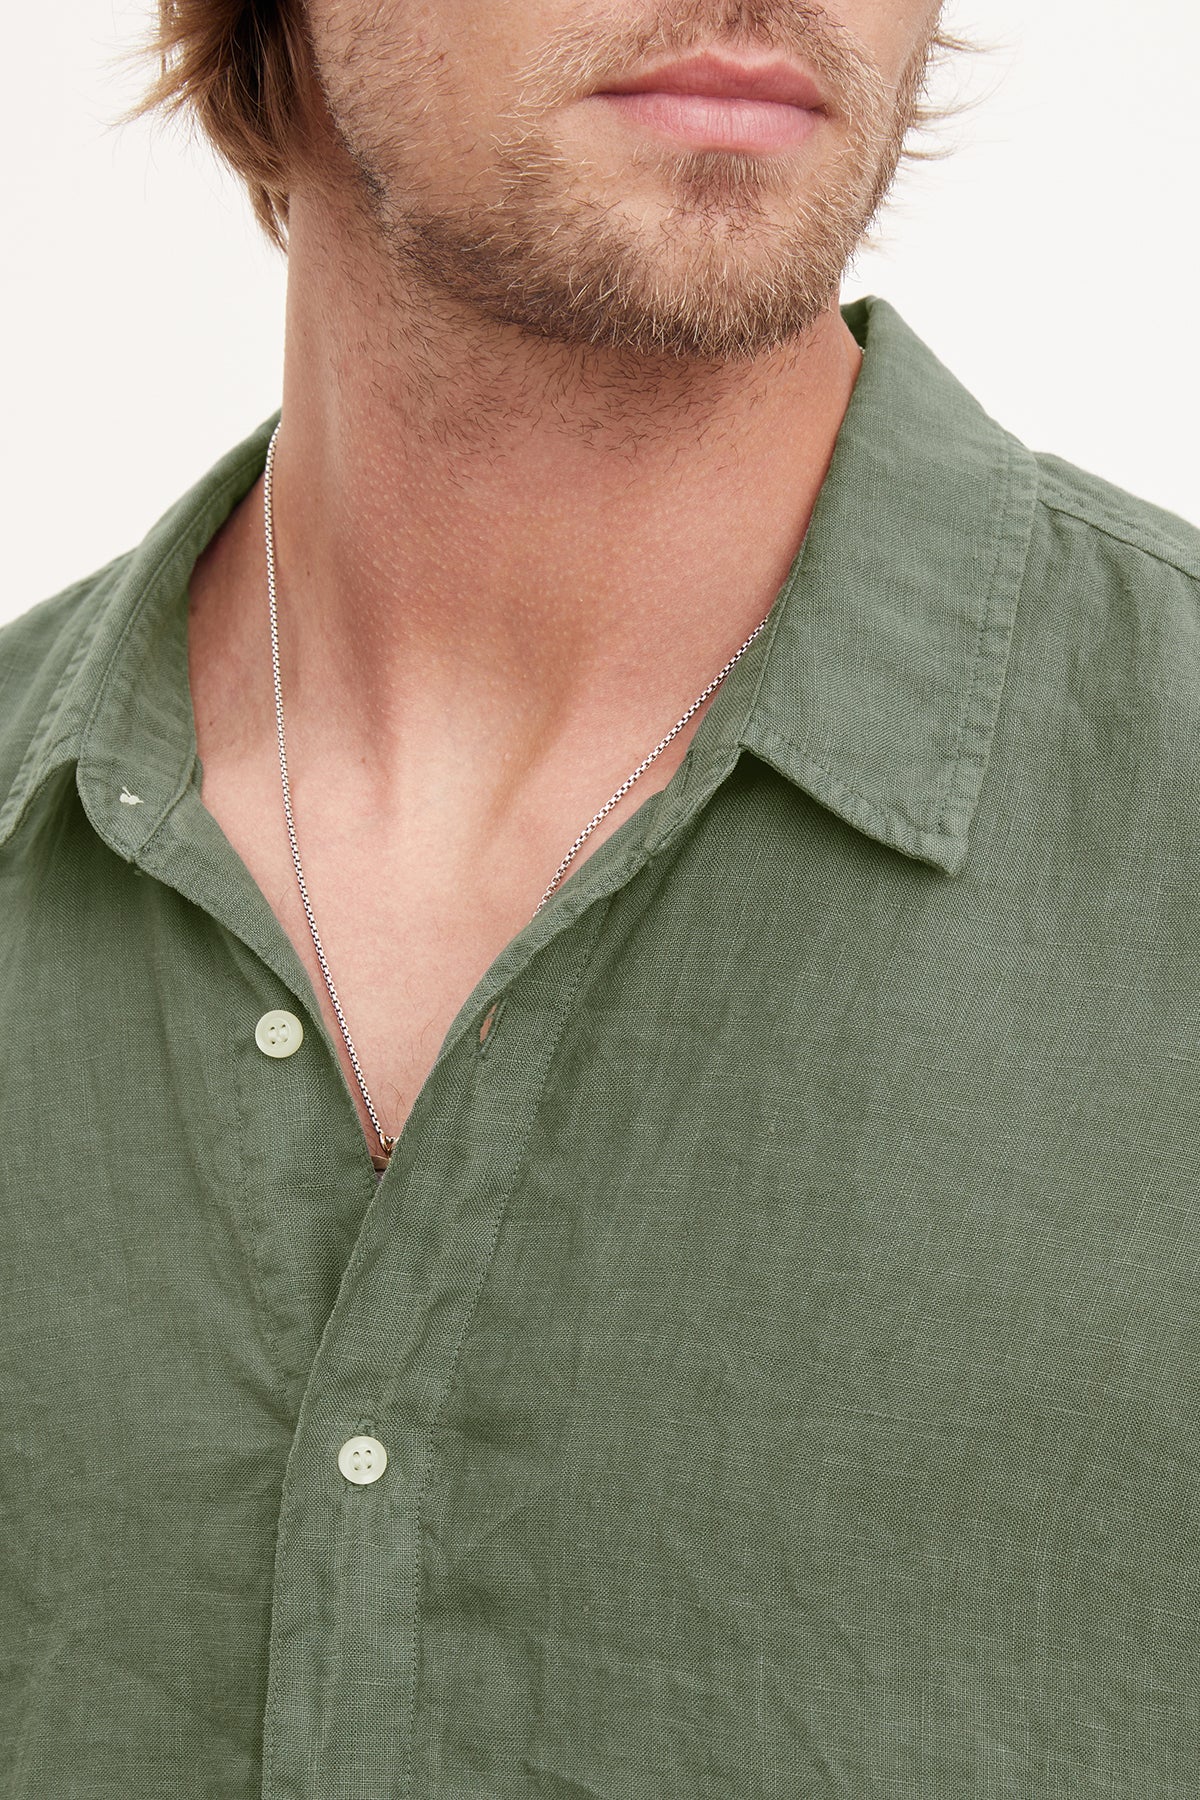   Close-up of a person with a beard wearing an olive green MACKIE LINEN BUTTON-UP SHIRT by Velvet by Graham & Spencer and a silver necklace. The image focuses on the short sleeve shirt's collar and upper chest area, perfect for a summer wardrobe. 